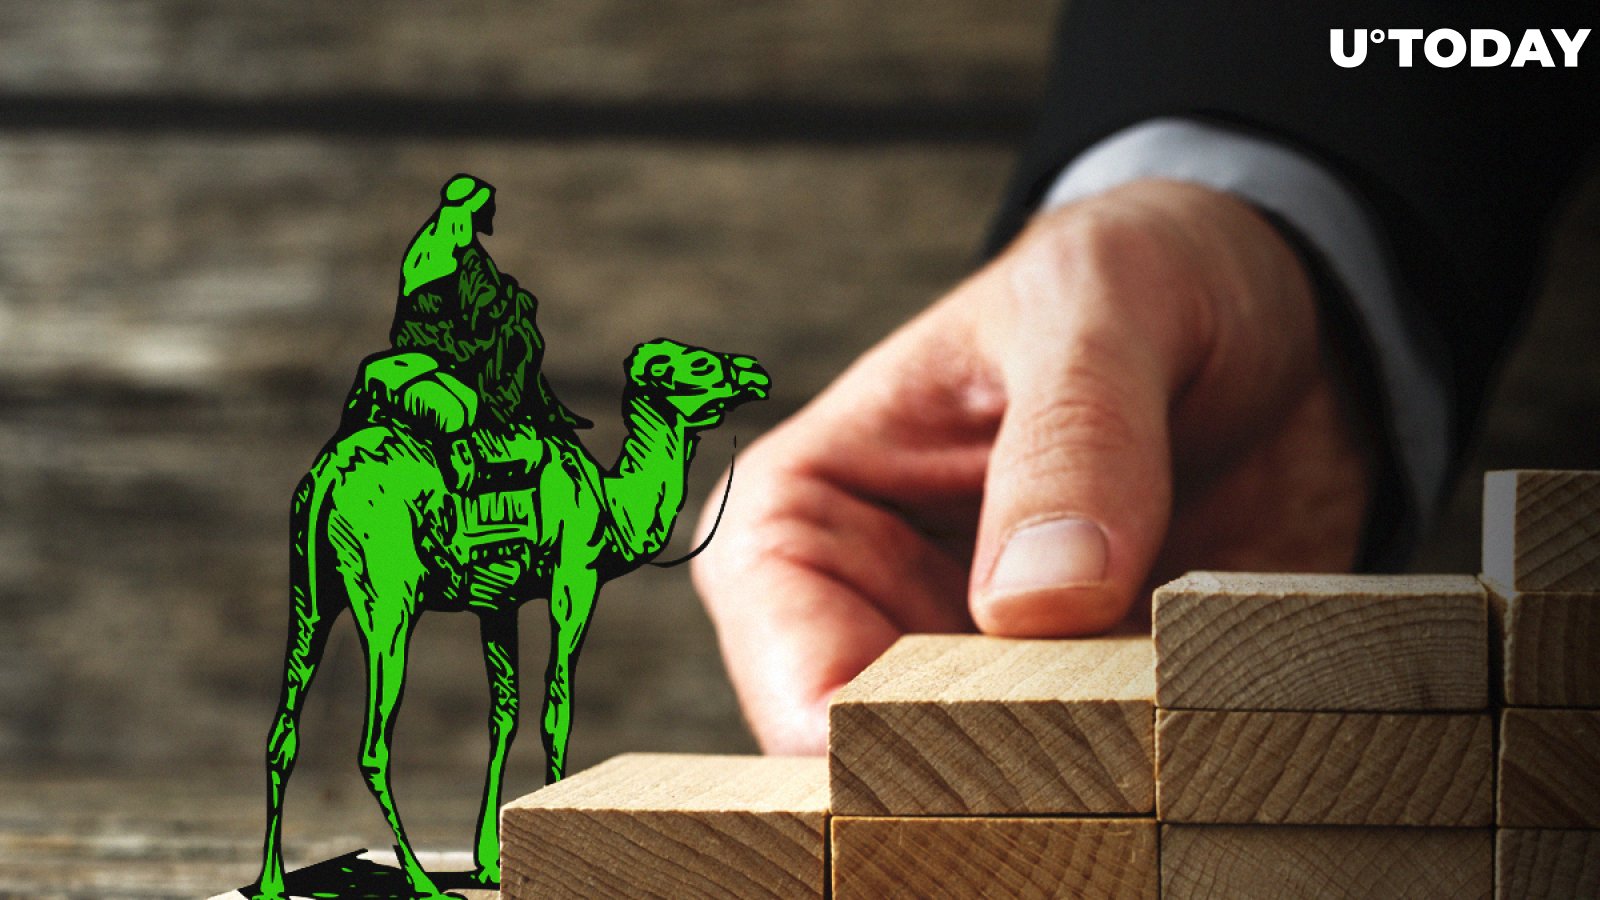 Silk Road Founder Gets Support from Charlie Kirk: "Total Miscarriage of Justice"